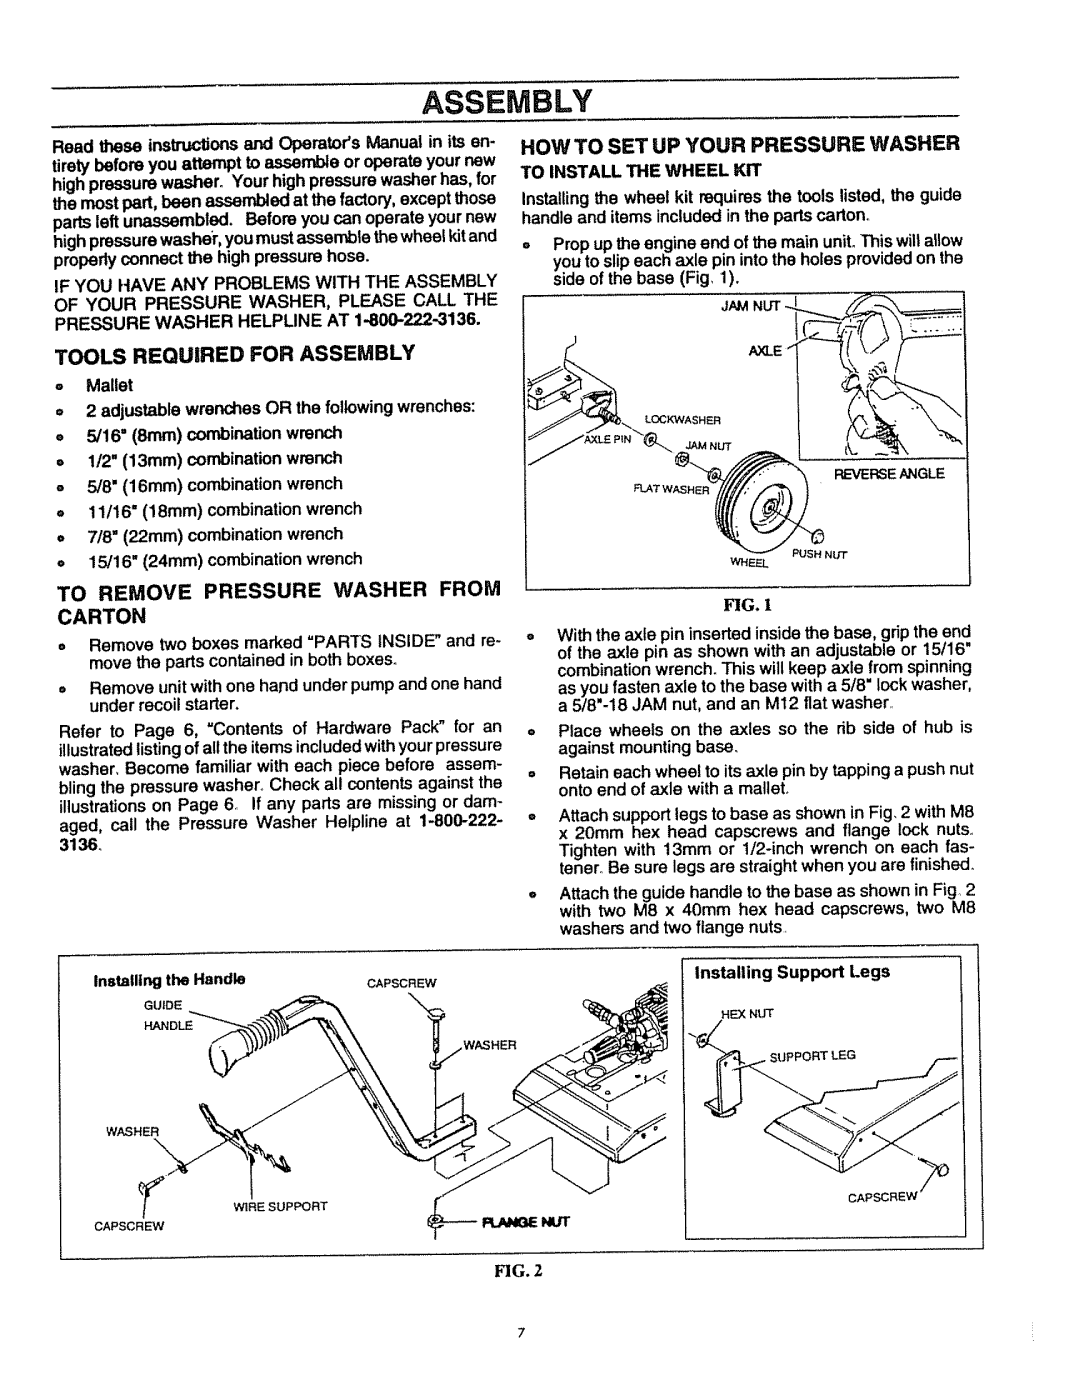 Sears 580.7515 manual Assembly, Fig 